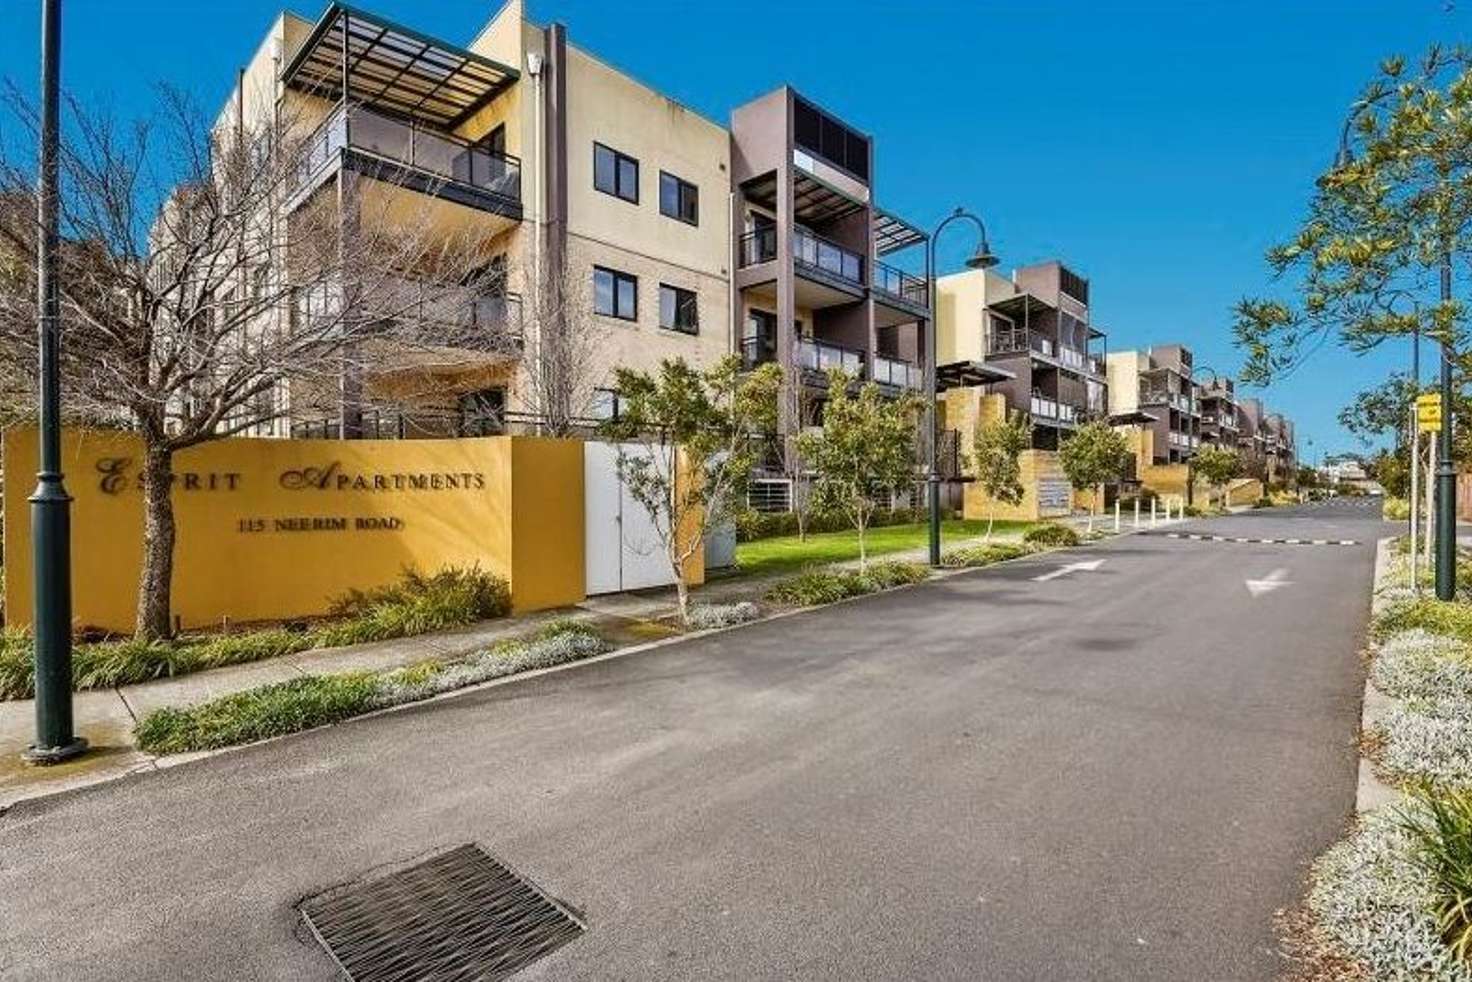 Main view of Homely apartment listing, 41/115 Neerim Road, Glen Huntly VIC 3163